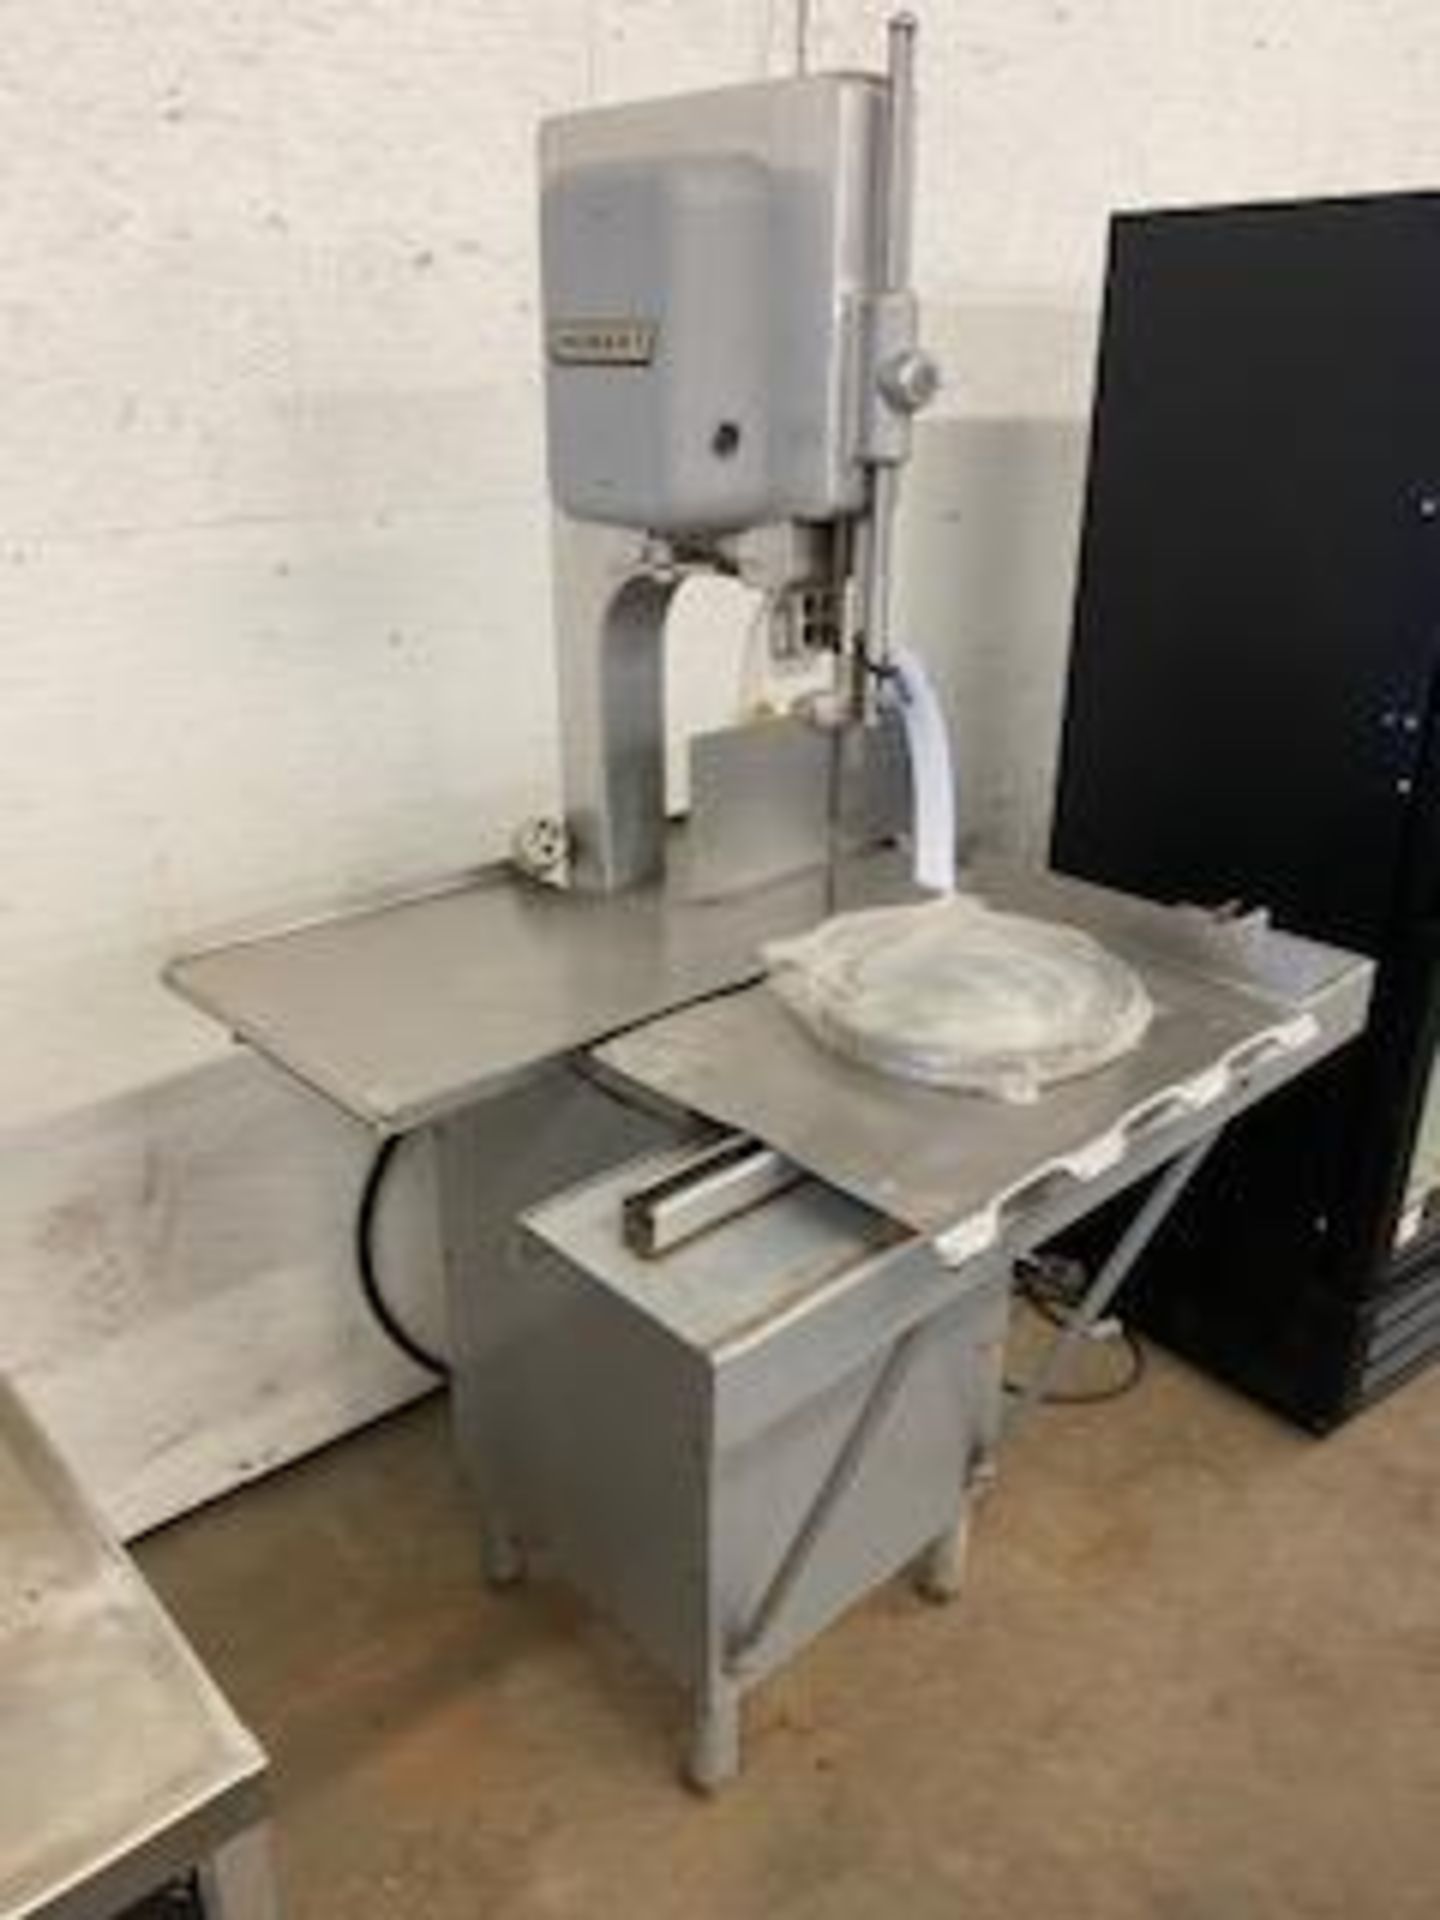 Hobart meat band saw 3ph model 5212 2HP - Image 2 of 3